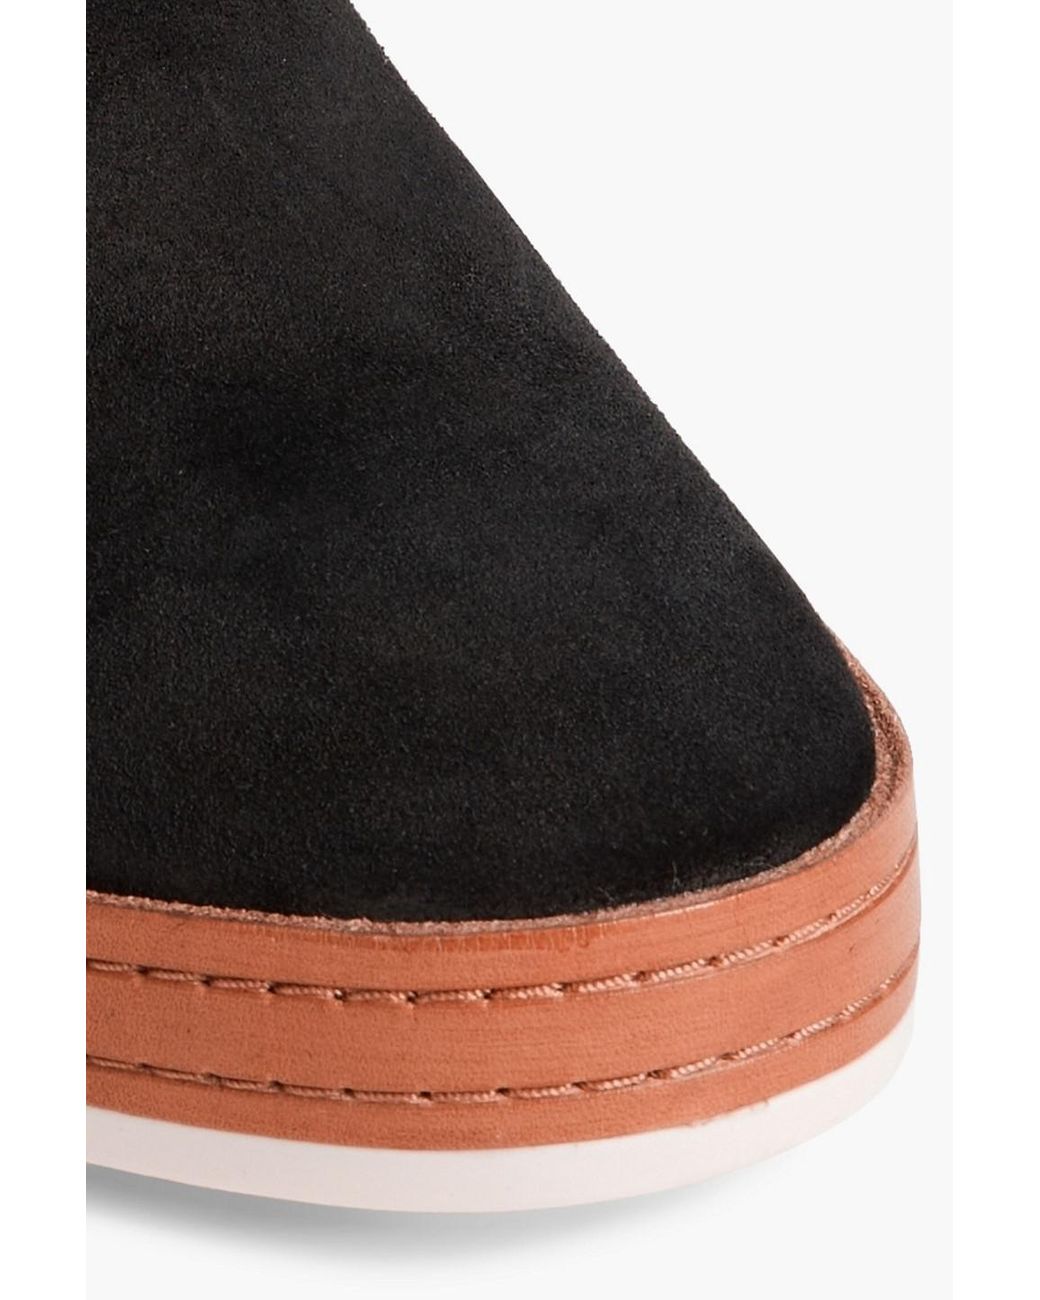 Vince Canella Suede Slippers in Black | Lyst